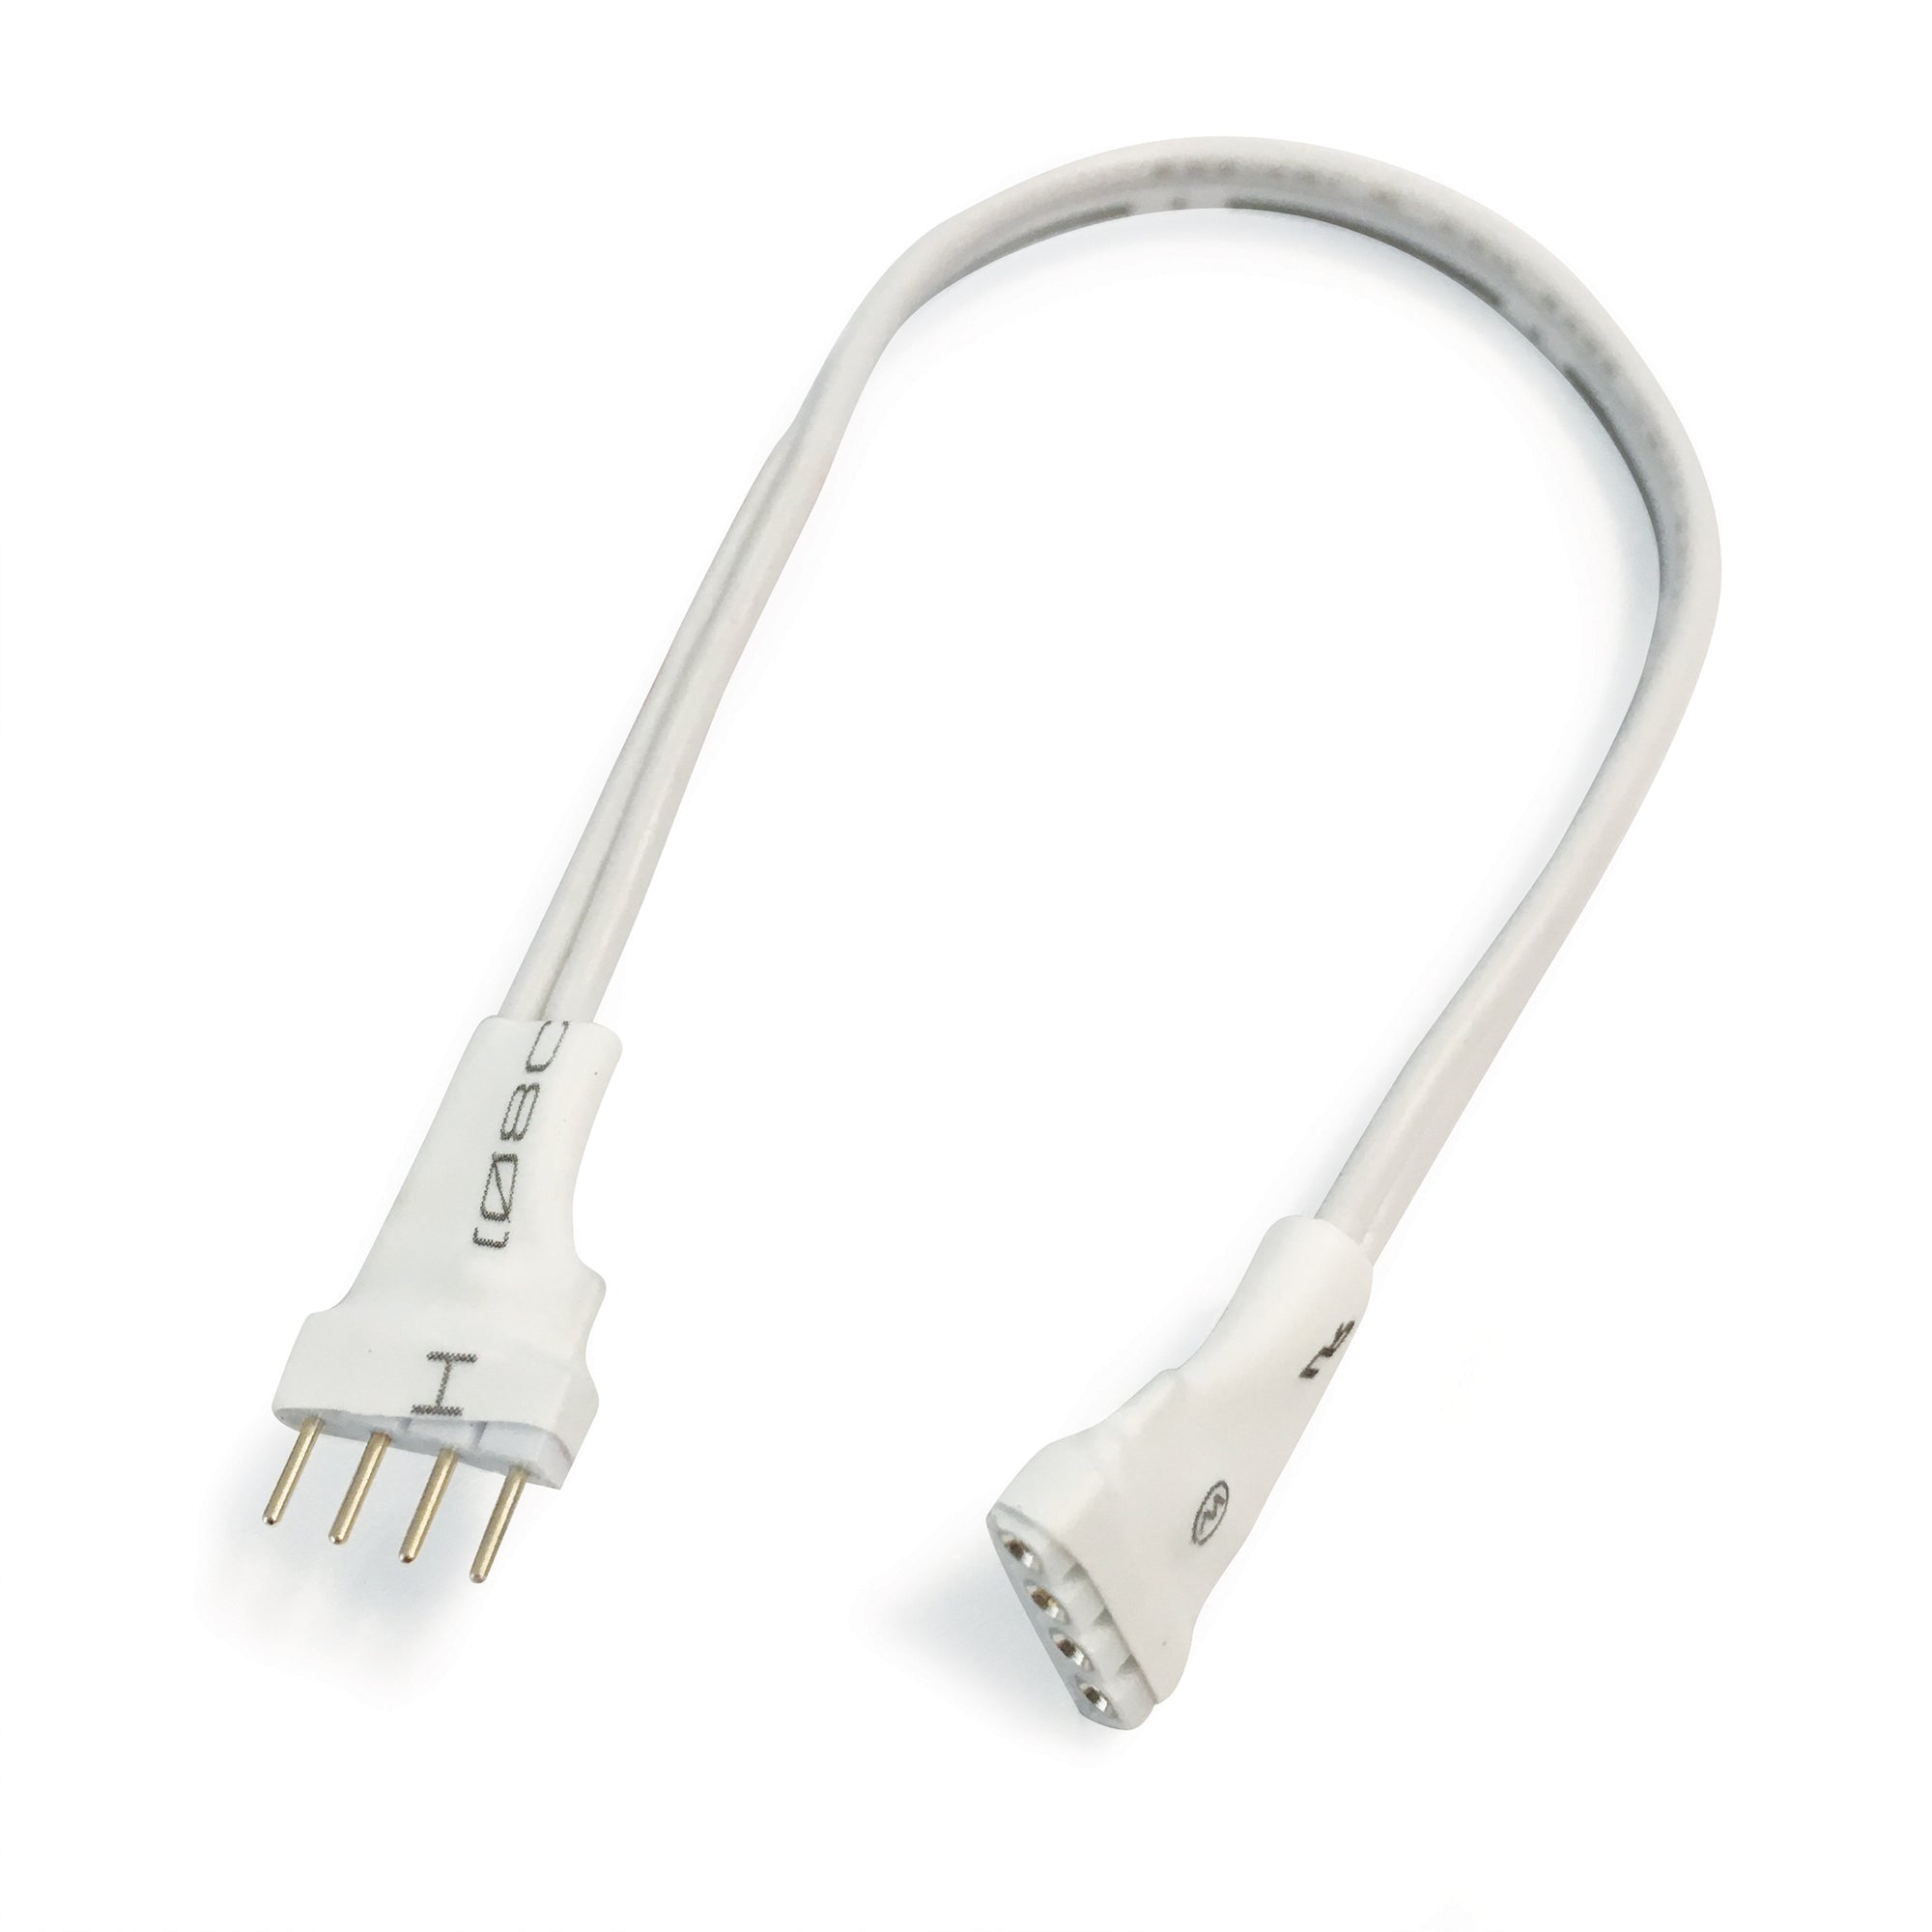 Nora Lighting NATL-236W - Accent / Undercabinet - 36 Inch Interconnection Cable for Standard & Side-Lit Tape Light, White